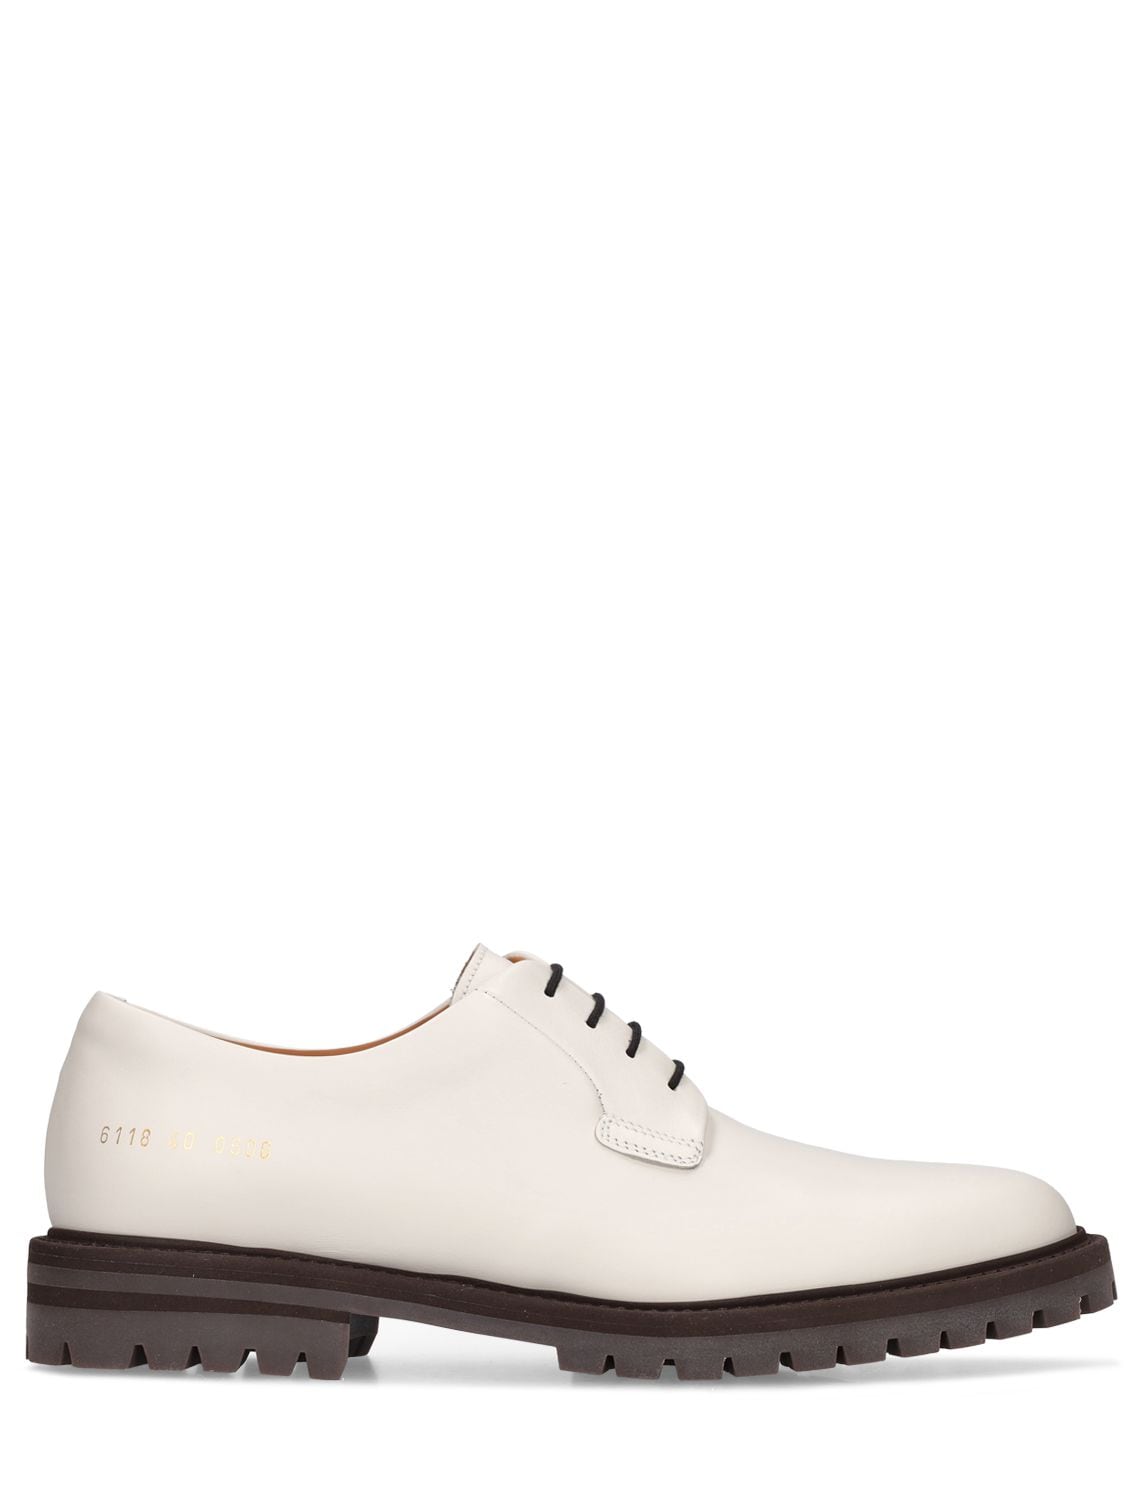 COMMON PROJECTS DERBY OXFORD SHOES